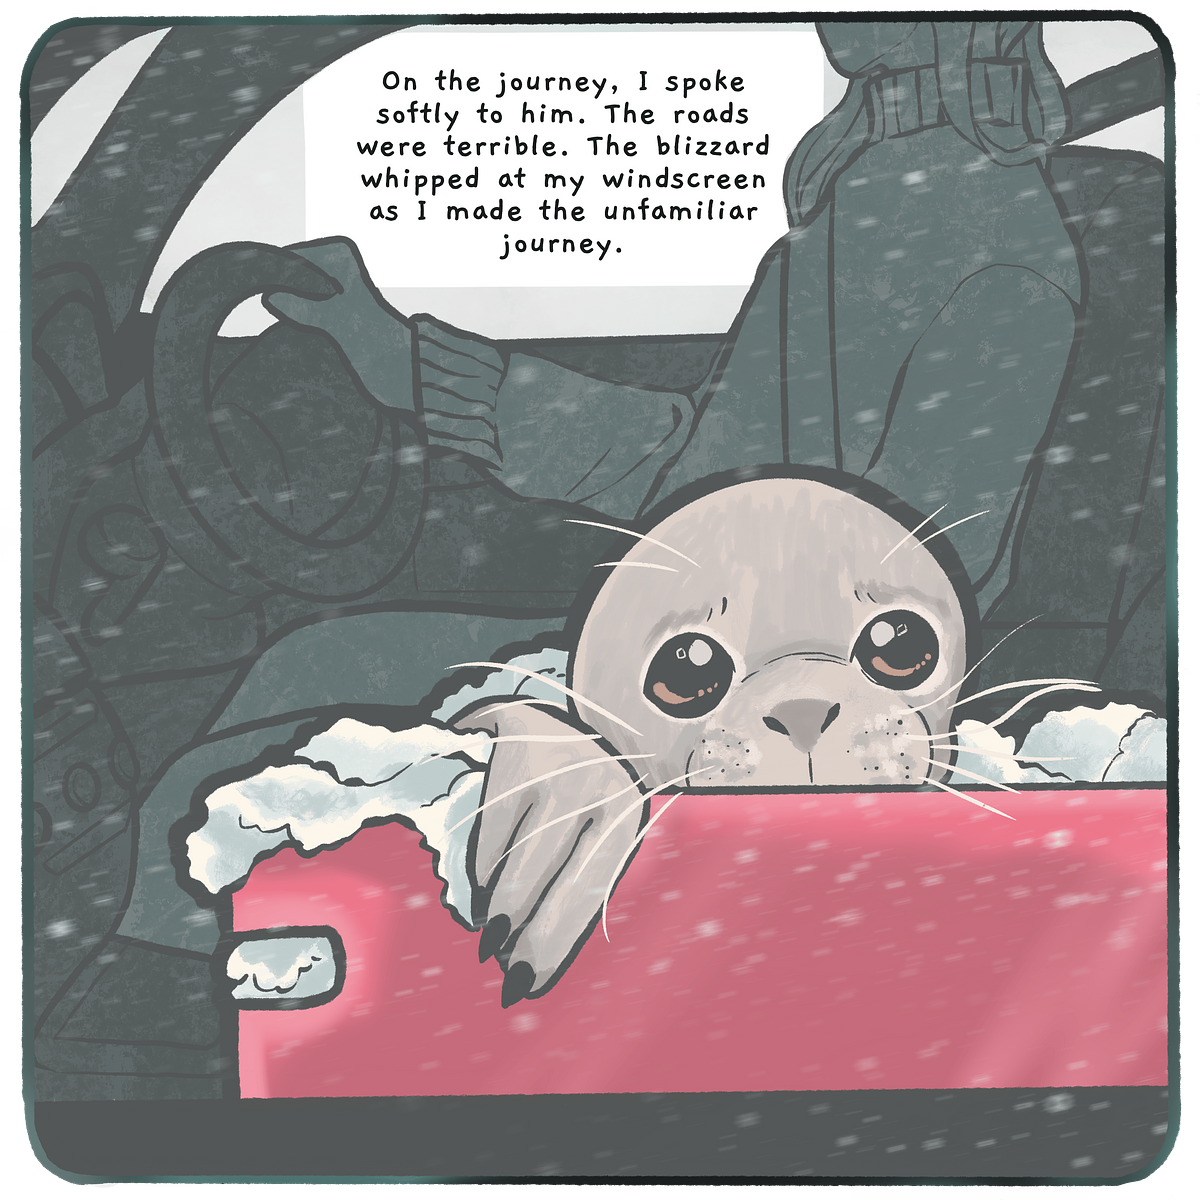 comic illustration of car interior and sad seal pup looking out the window with text bubble that reads: 'On the journey, I spoke softly to him. The roads were terrible. The blizzard whipped at my windscreen as I made the unfamiliar journey.'